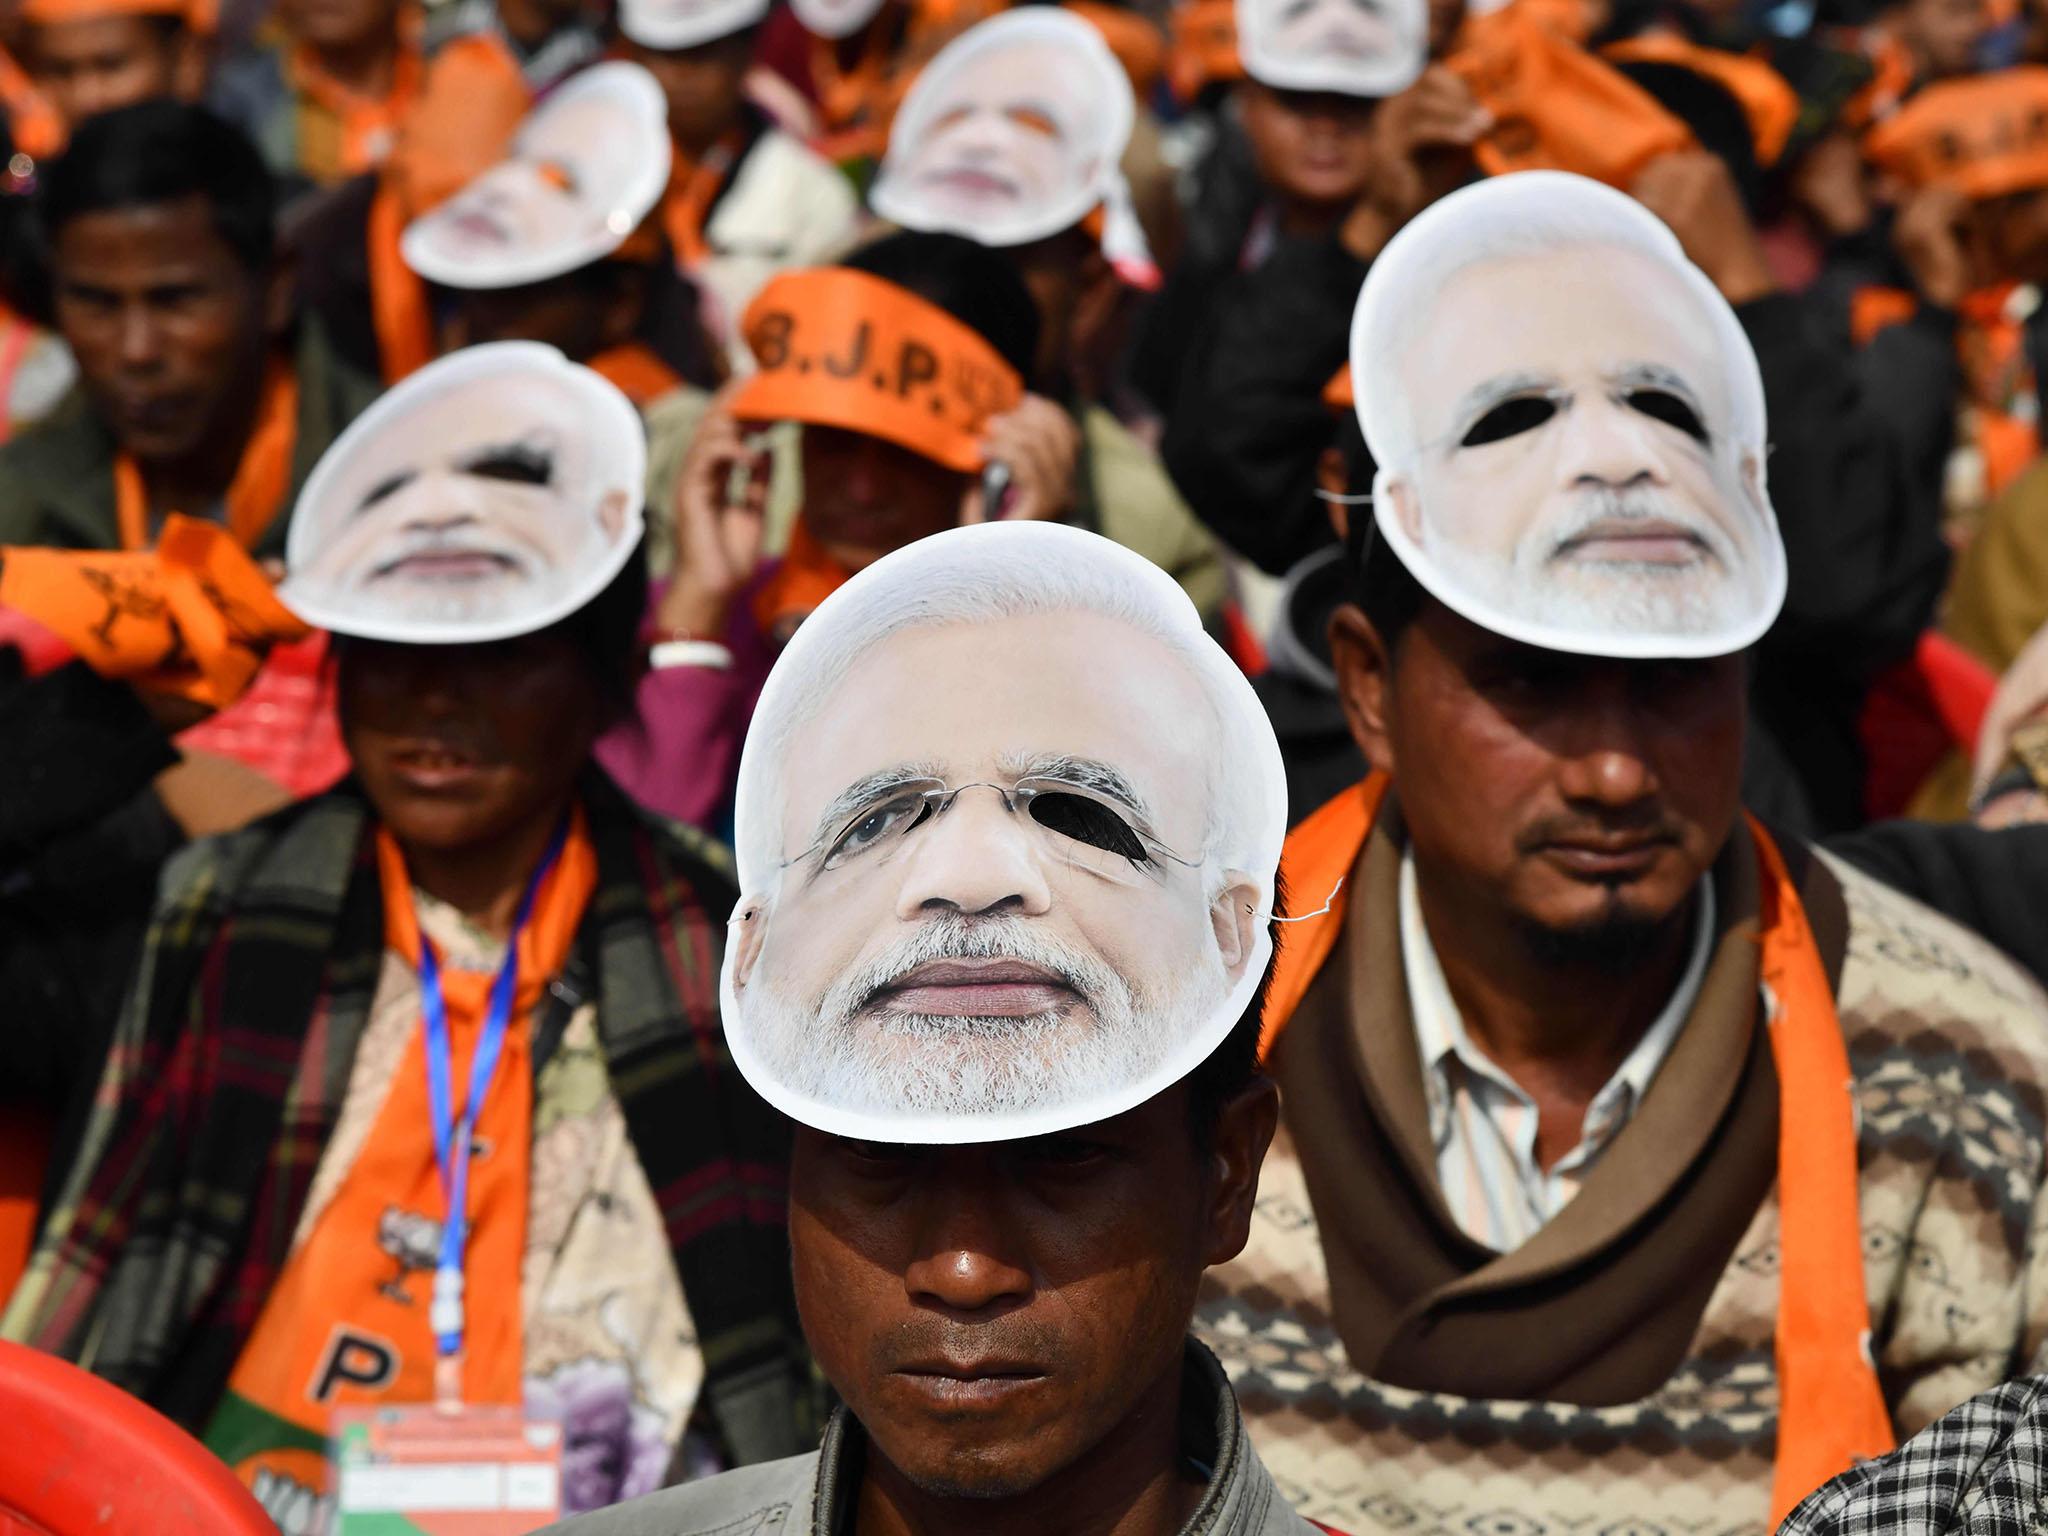 Modi's party, the Bharatiya Janata Party (BJP), saw its majority squeezed in Indian state elections